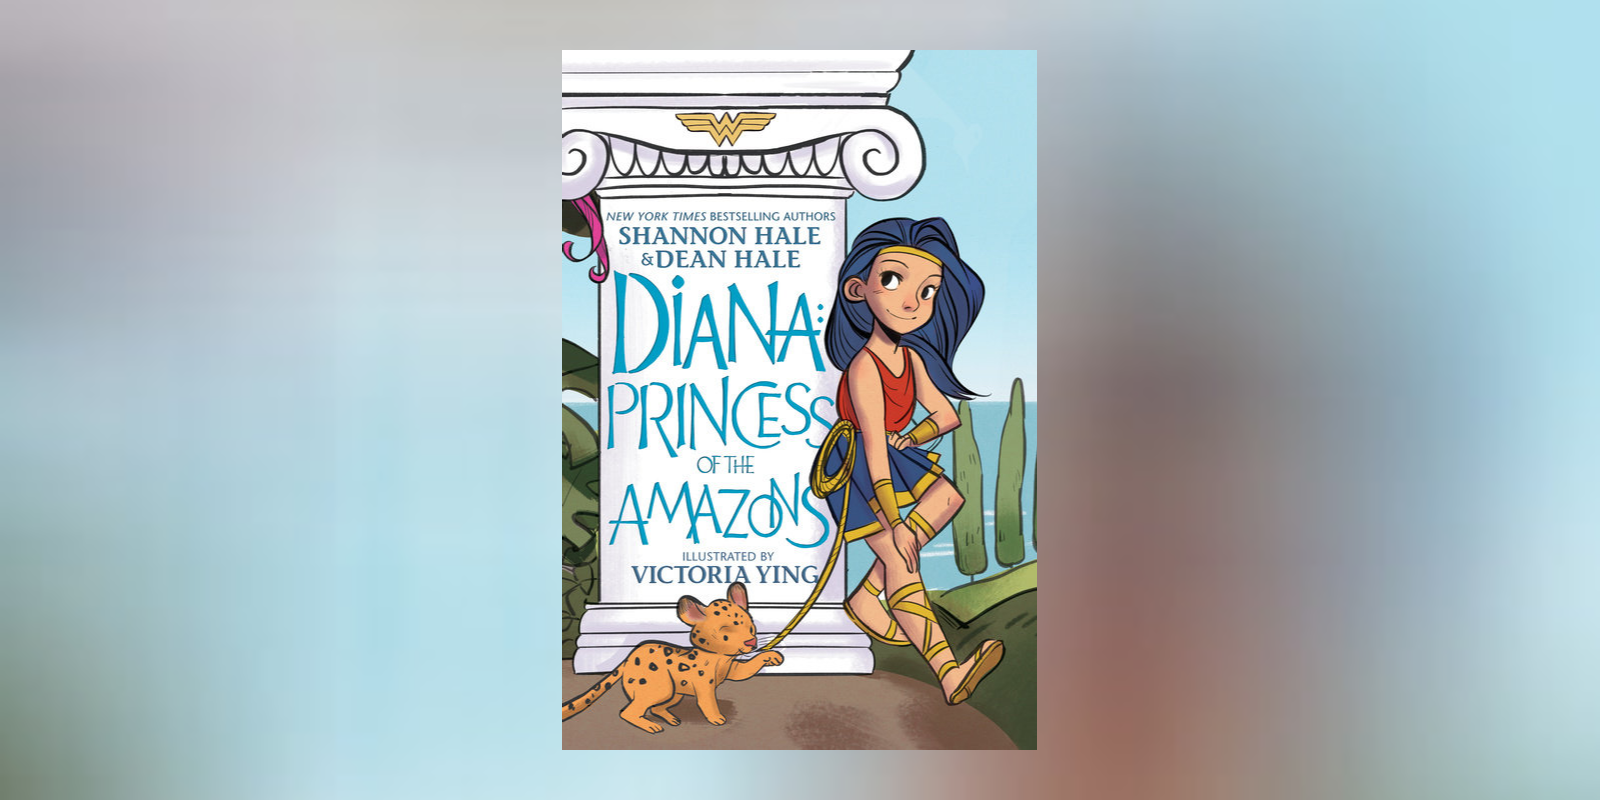 Bringing Excitement, Joy and Kangas to Diana: Princess of the Amazons